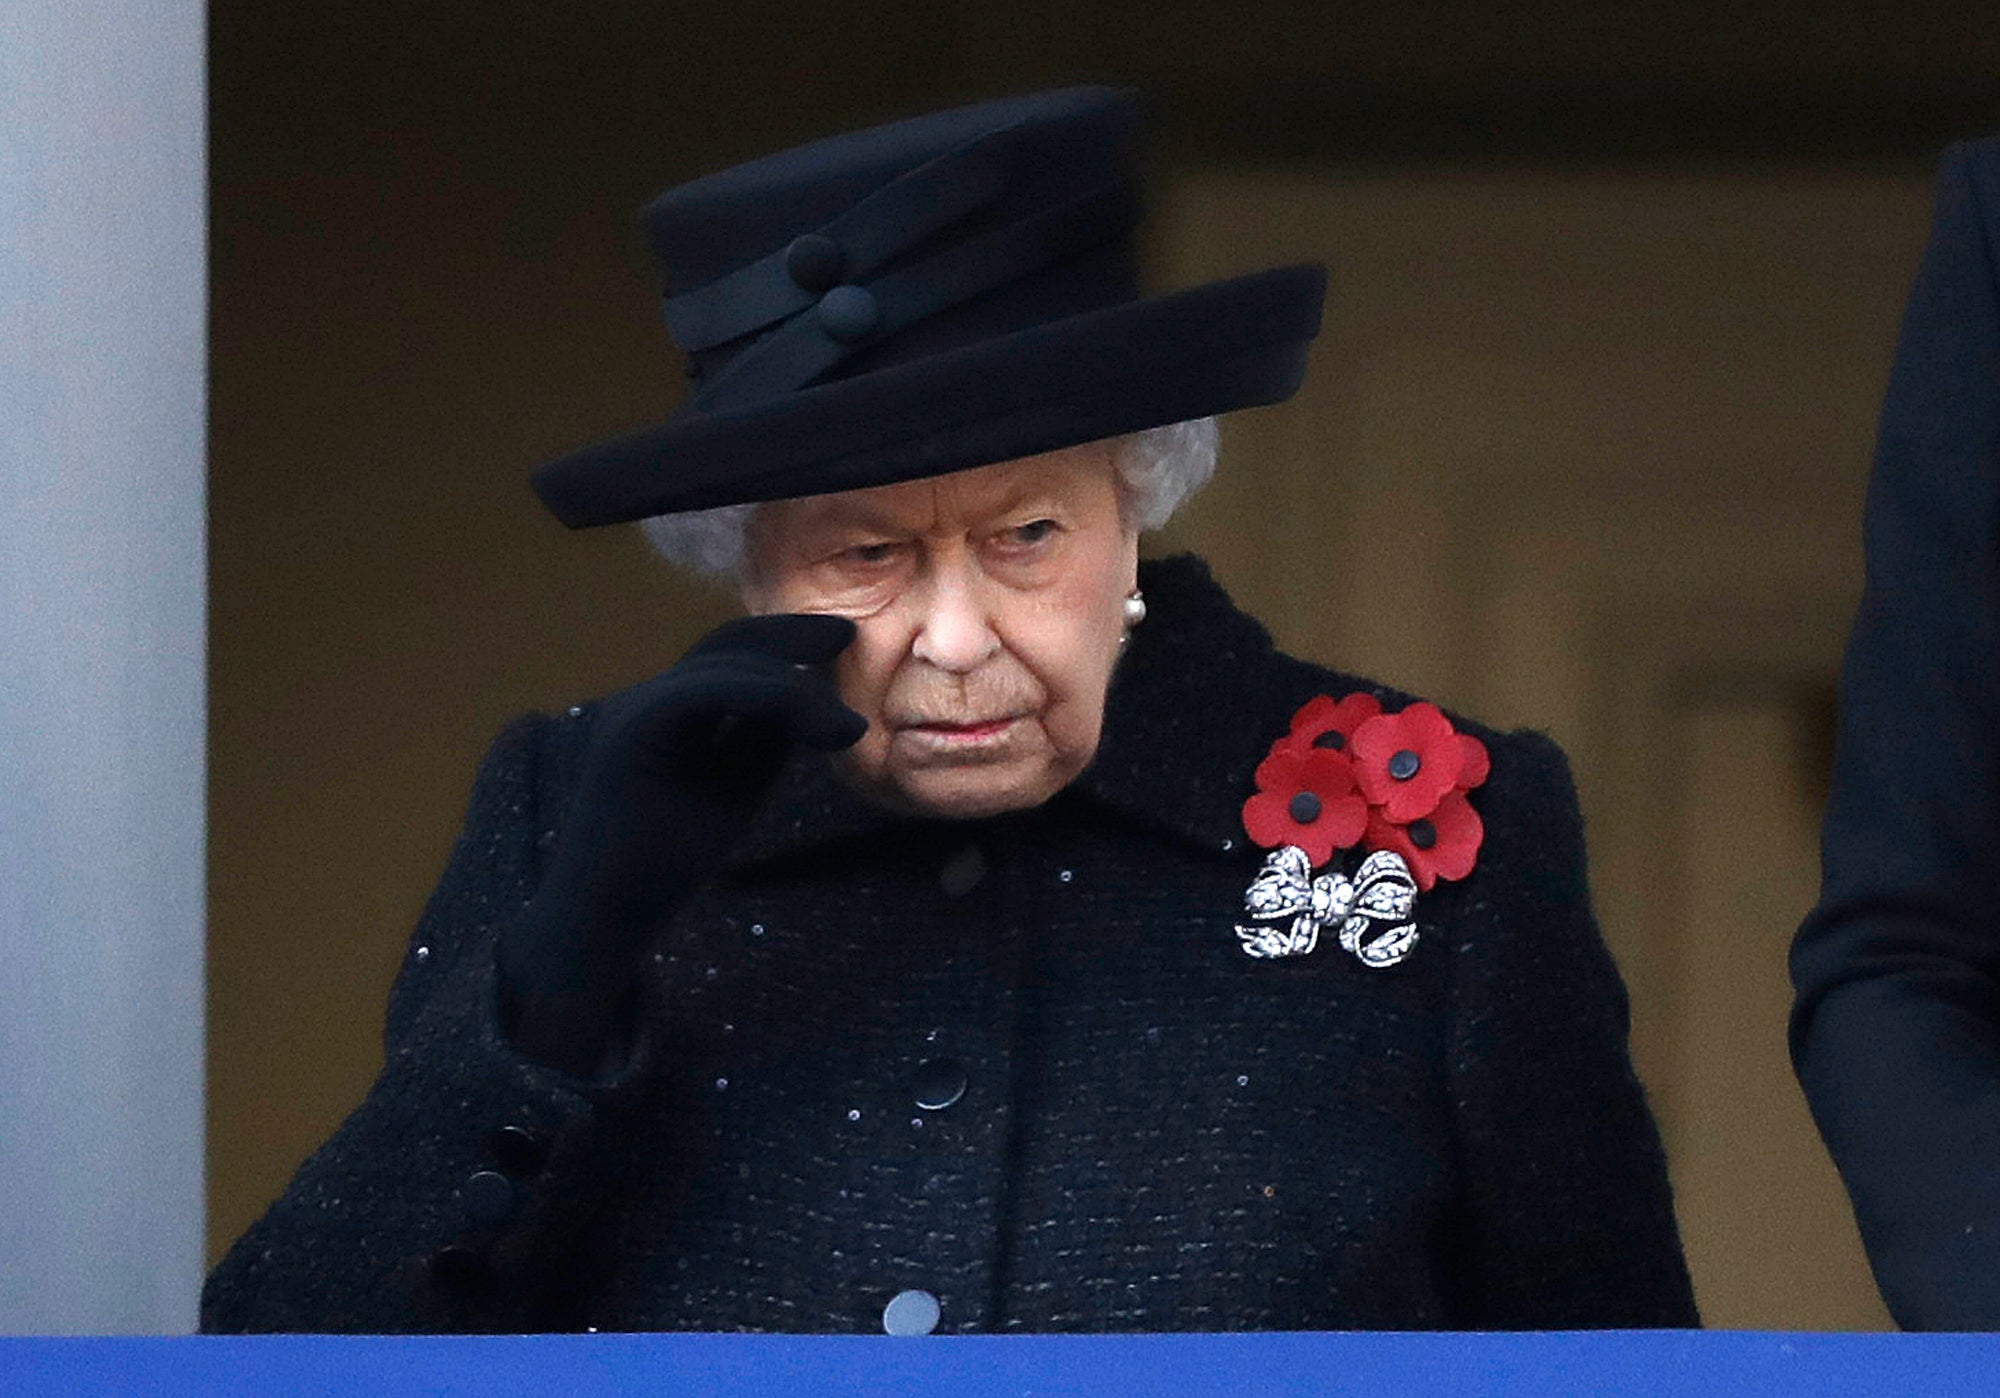 The Queen will no longer attend the service